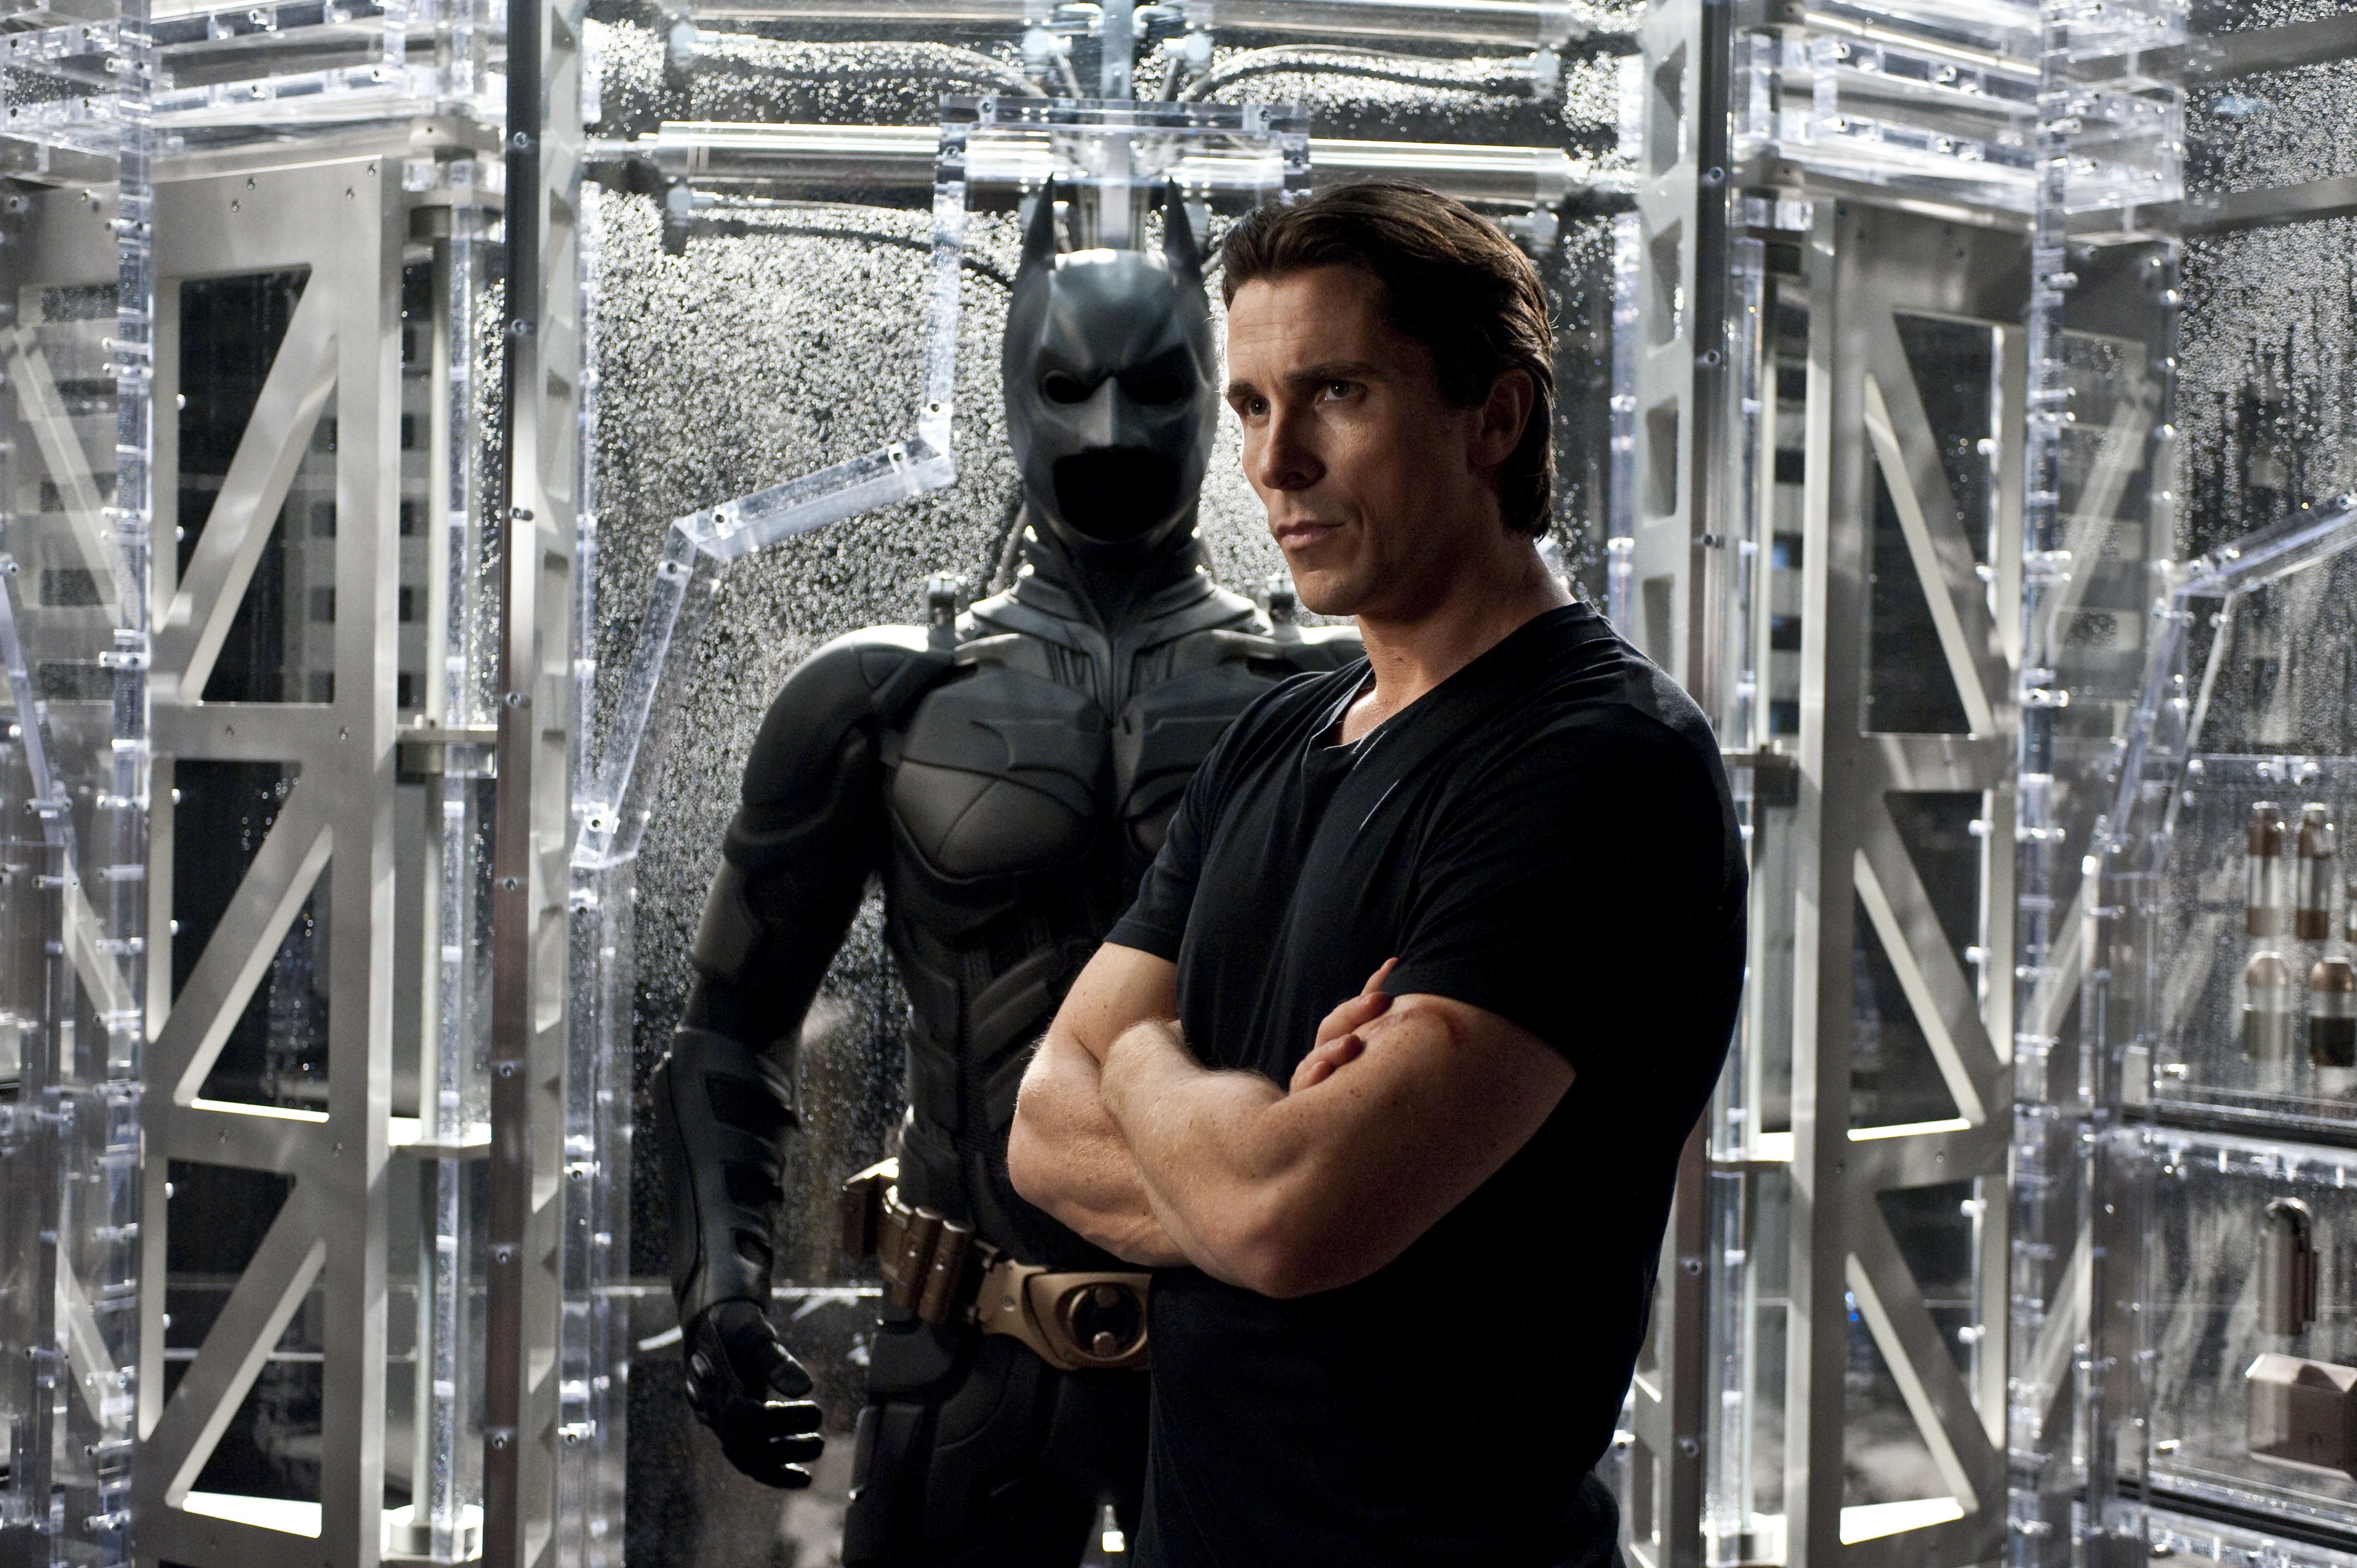 Christian Bale Workout: What We Know About His Extreme Transformations